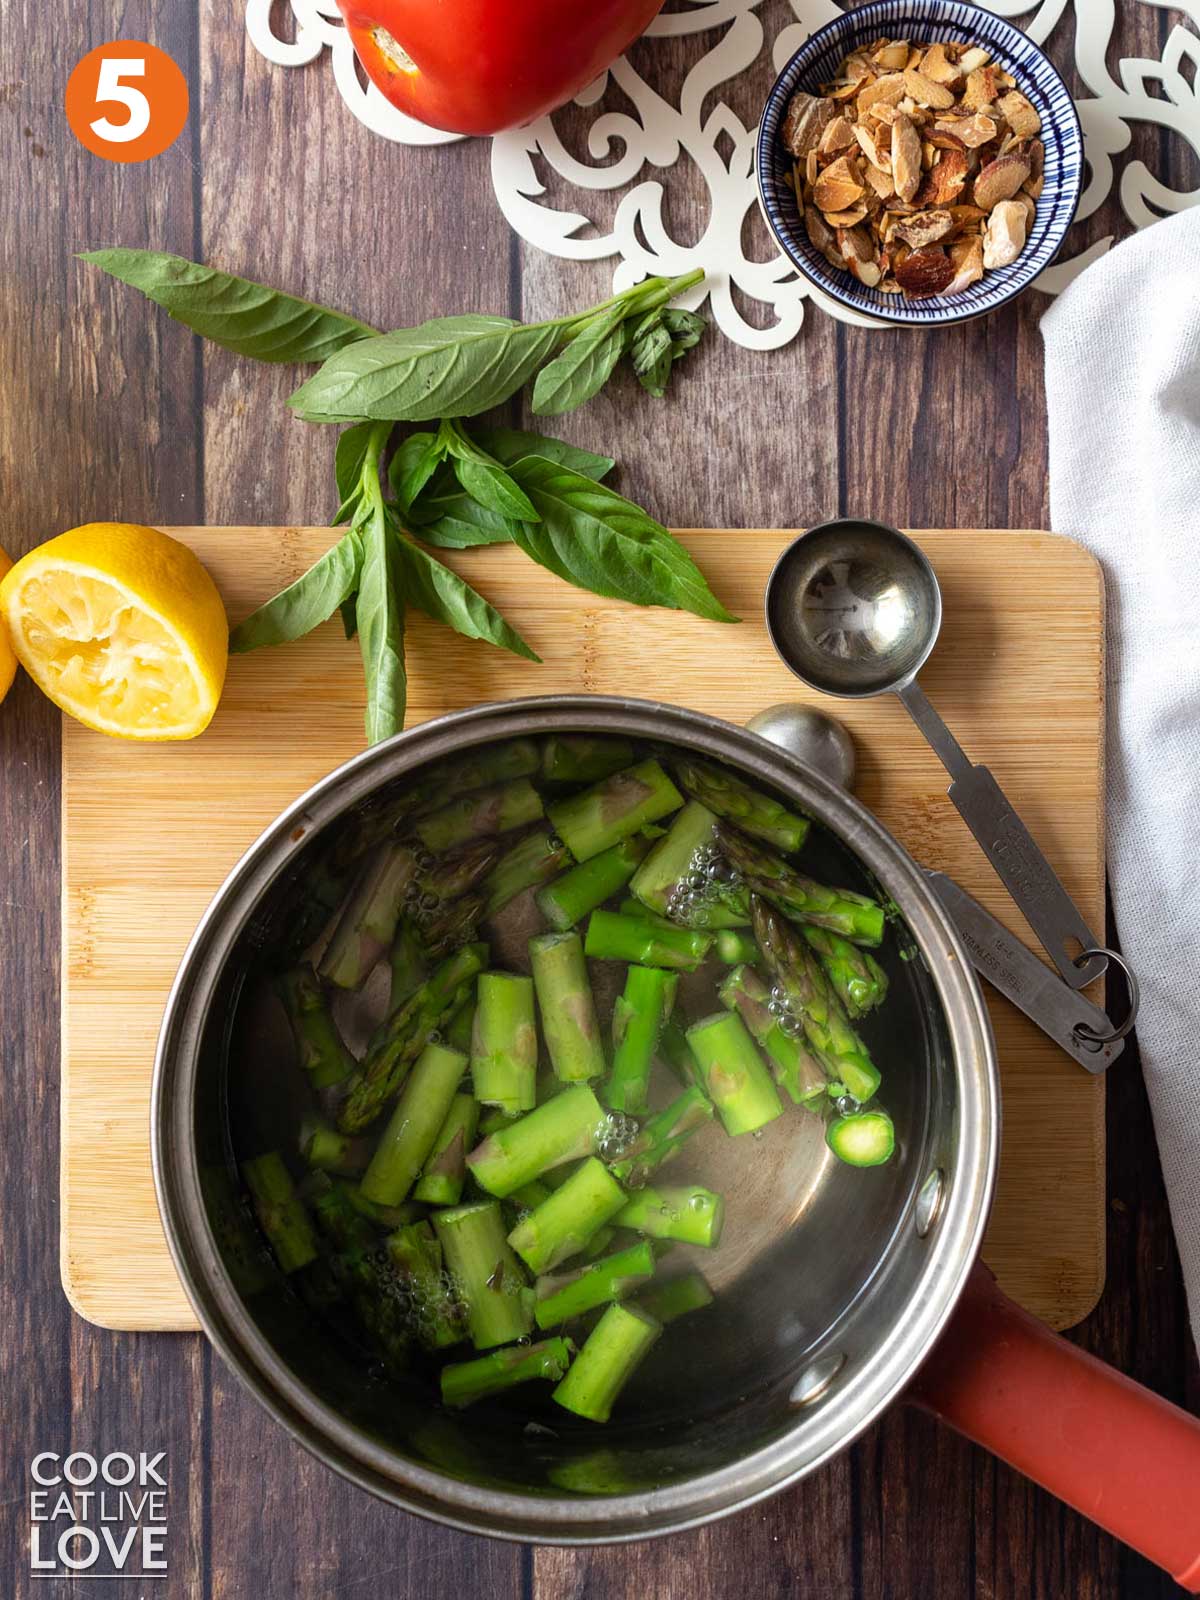 Asparagus cooking in a saucepan with water.